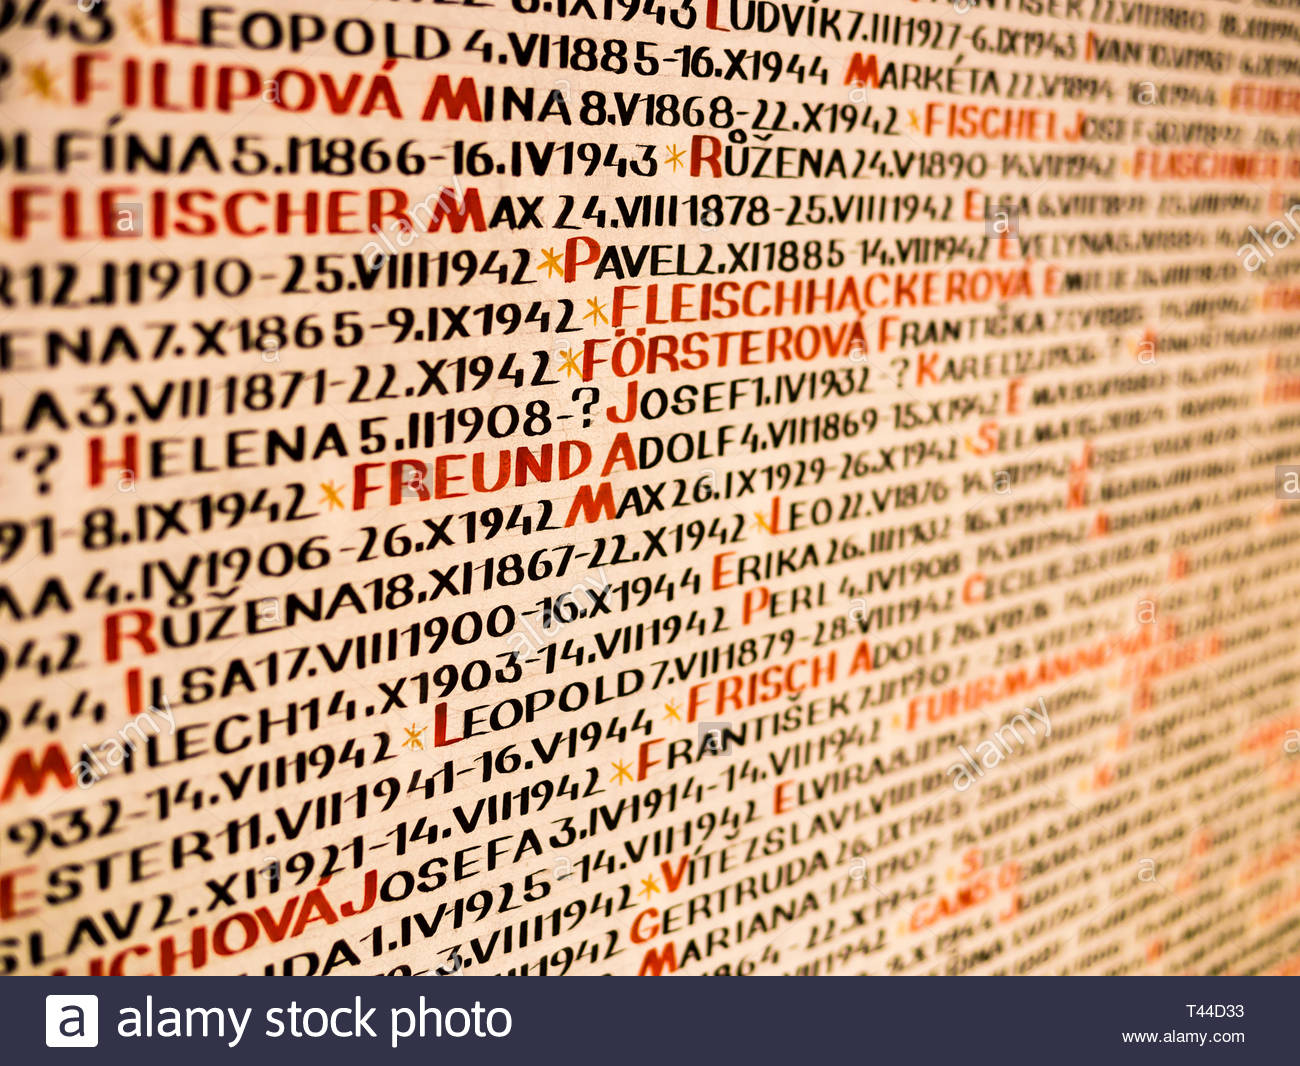 detail-of-pinkas-synagogue-wall-covered-with-the-names-of-the-victims-of-the-holocaust-prague-...jpg